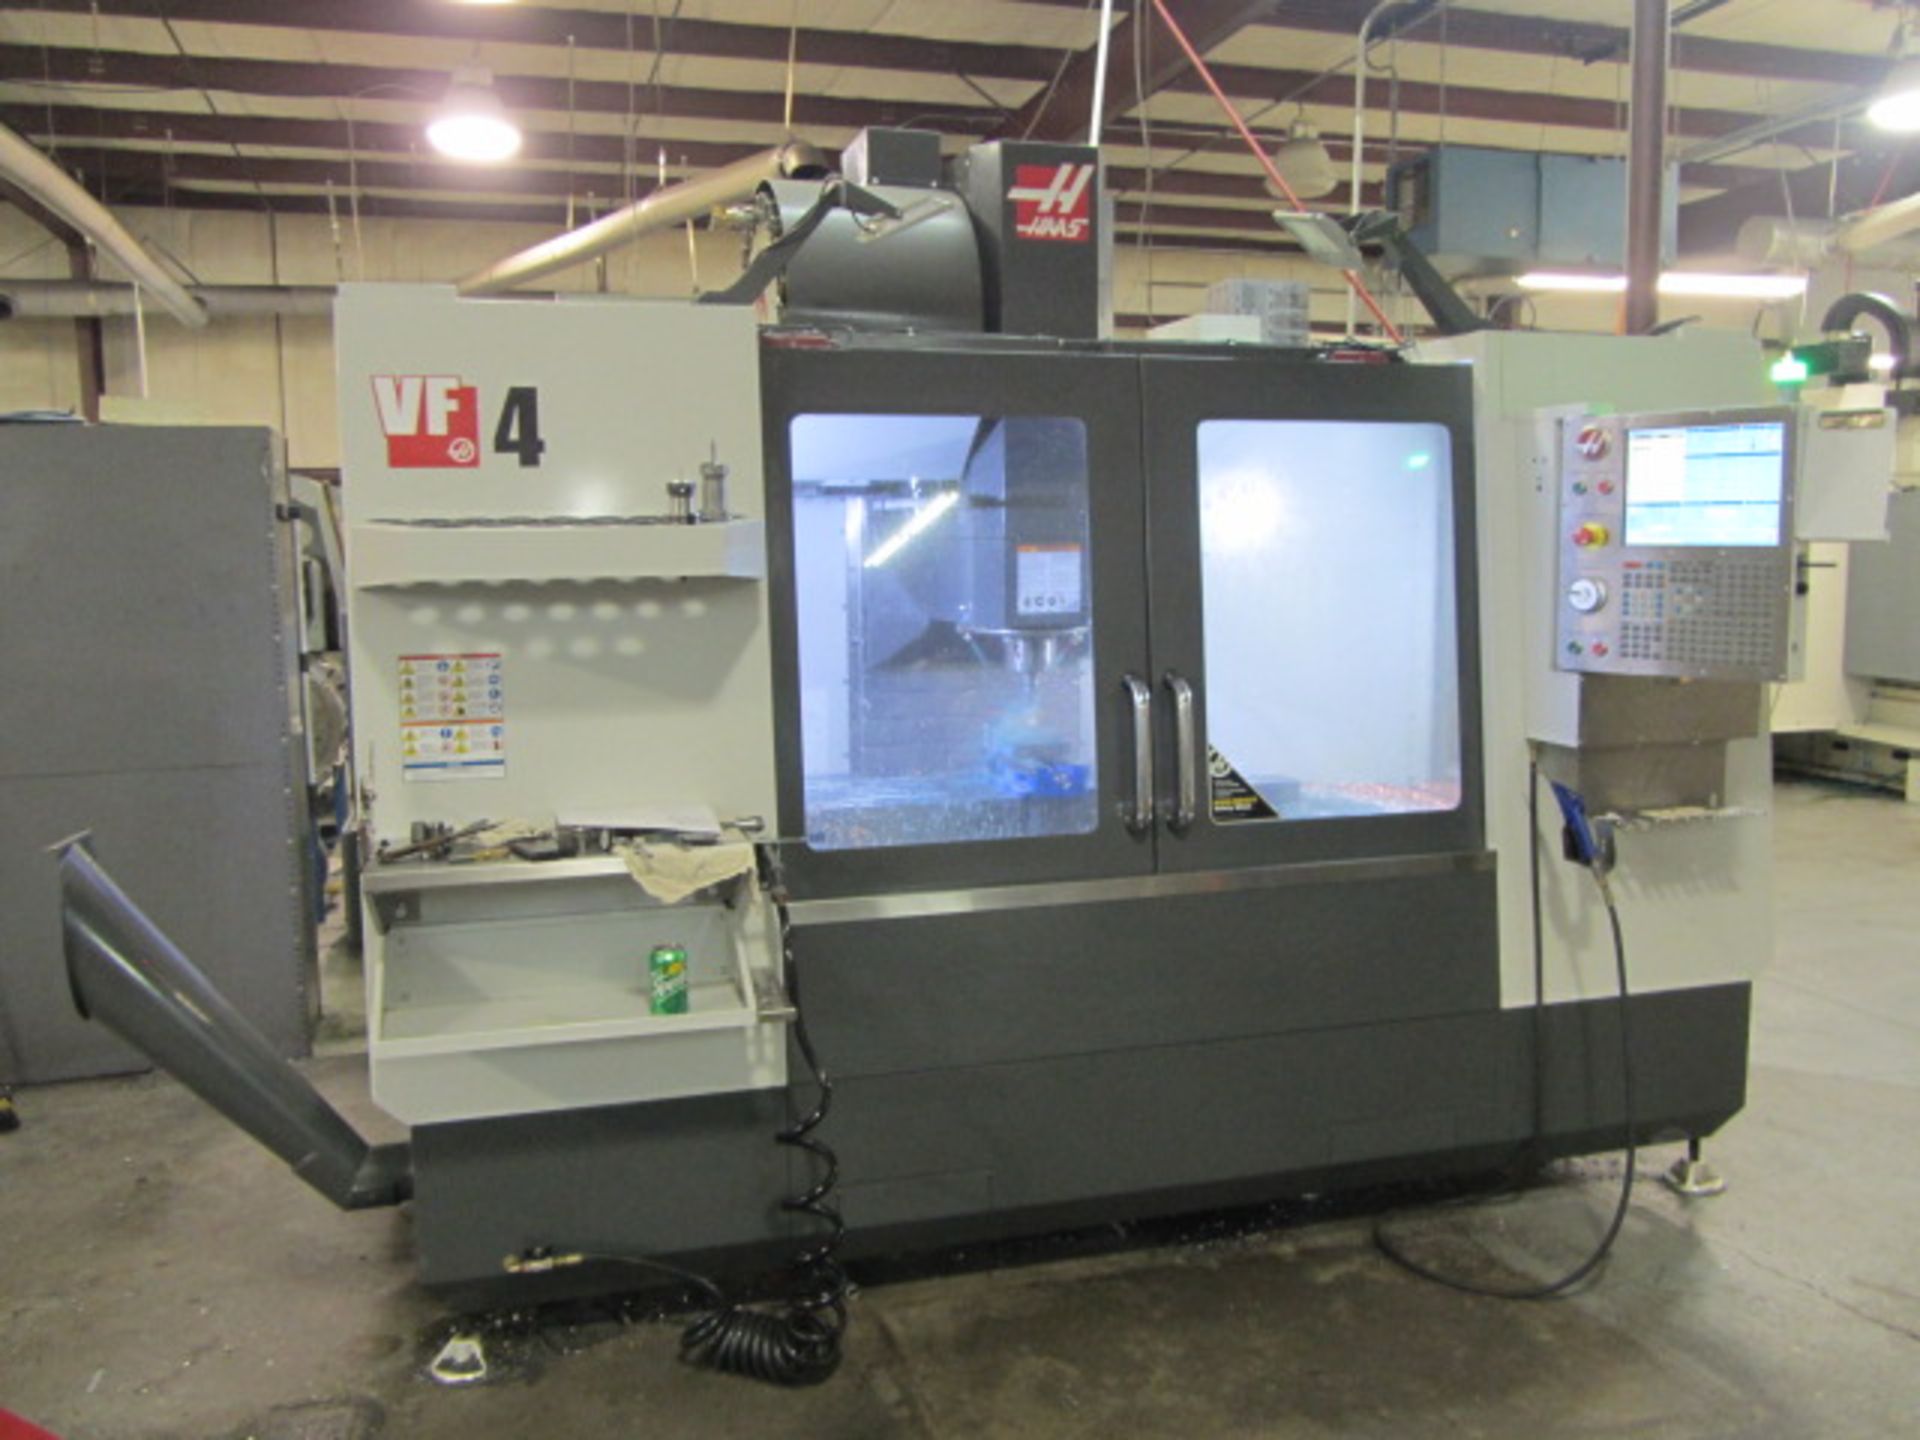 Haas VF-4 CNC Vertical Machining Center with 52'' x 20'' Table, #40 Taper Spindle Speeds to 8100